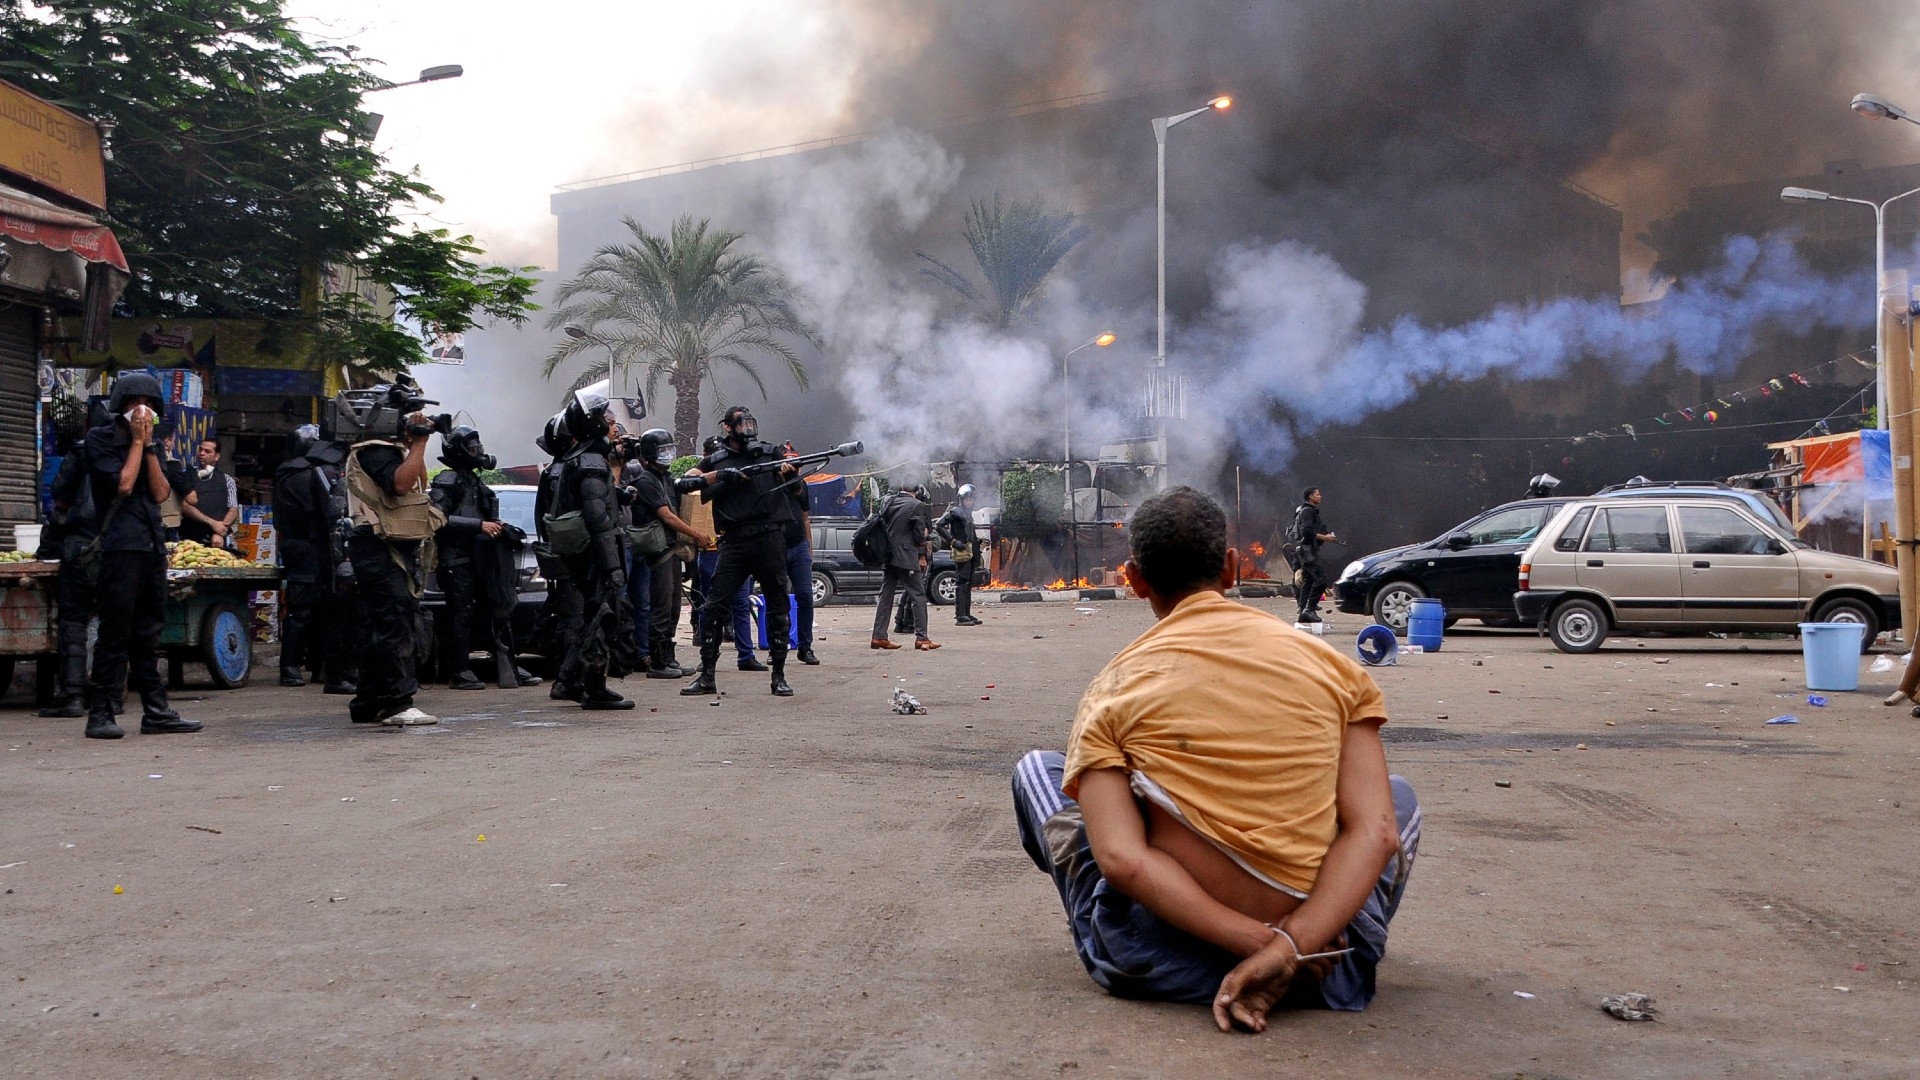 A handcuffed protester sits on the ground as Egyptian security forces move in to disperse supporters during the Rabaa massacre in Cairo, Egypt on 14 August 2013 (AFP)